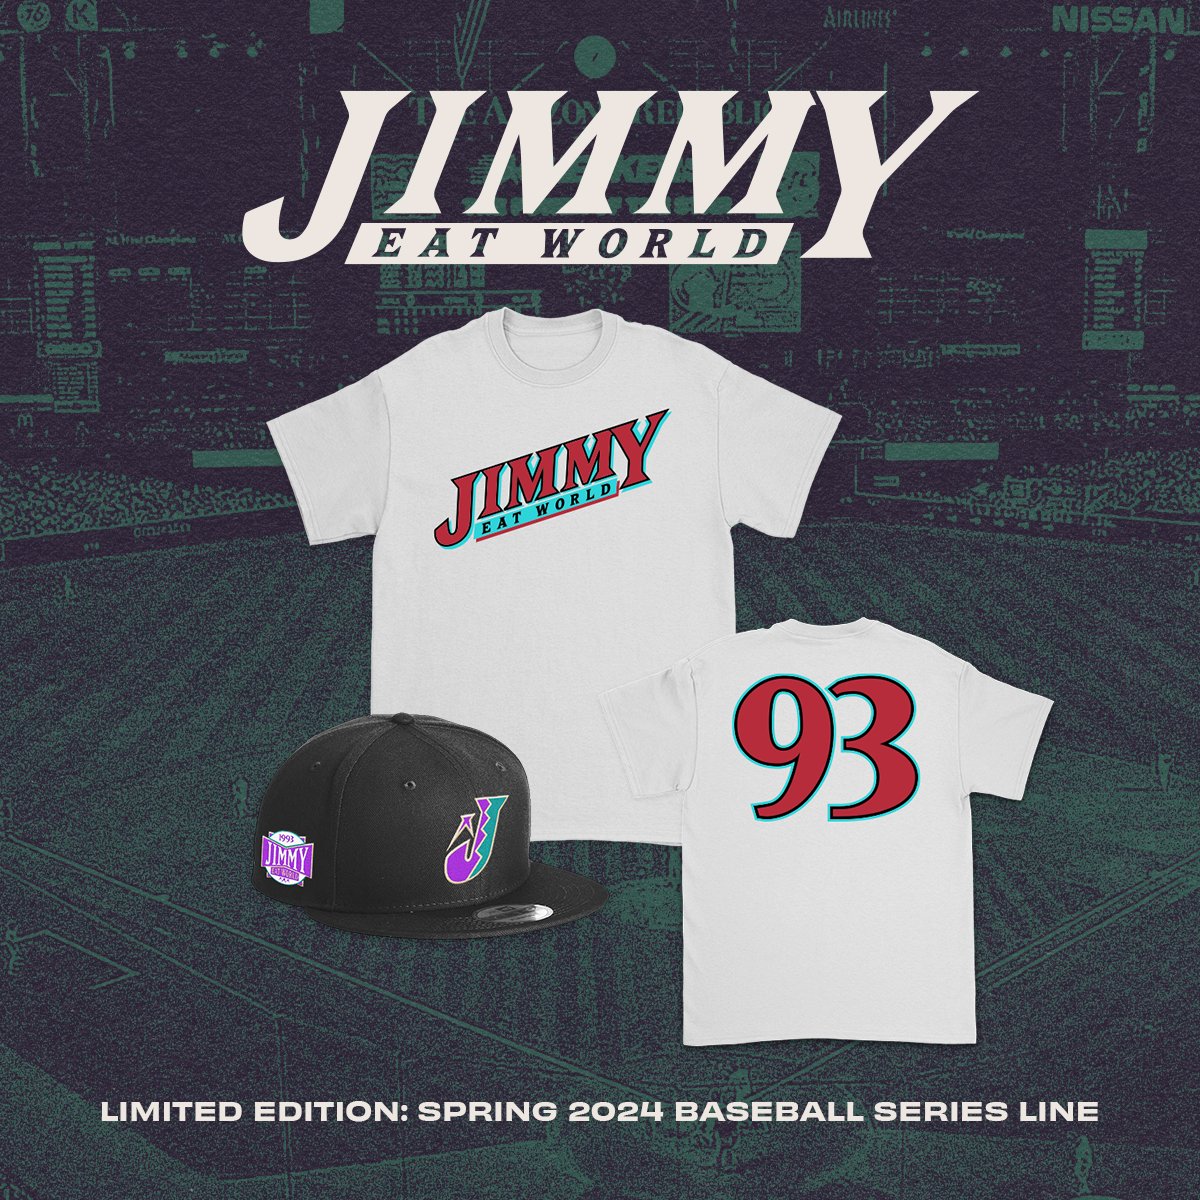 Shop the 2024 Baseball Series Snapback Hat + Tee now available in the official store!! ⚾️🧢 jimmyeatworld.store